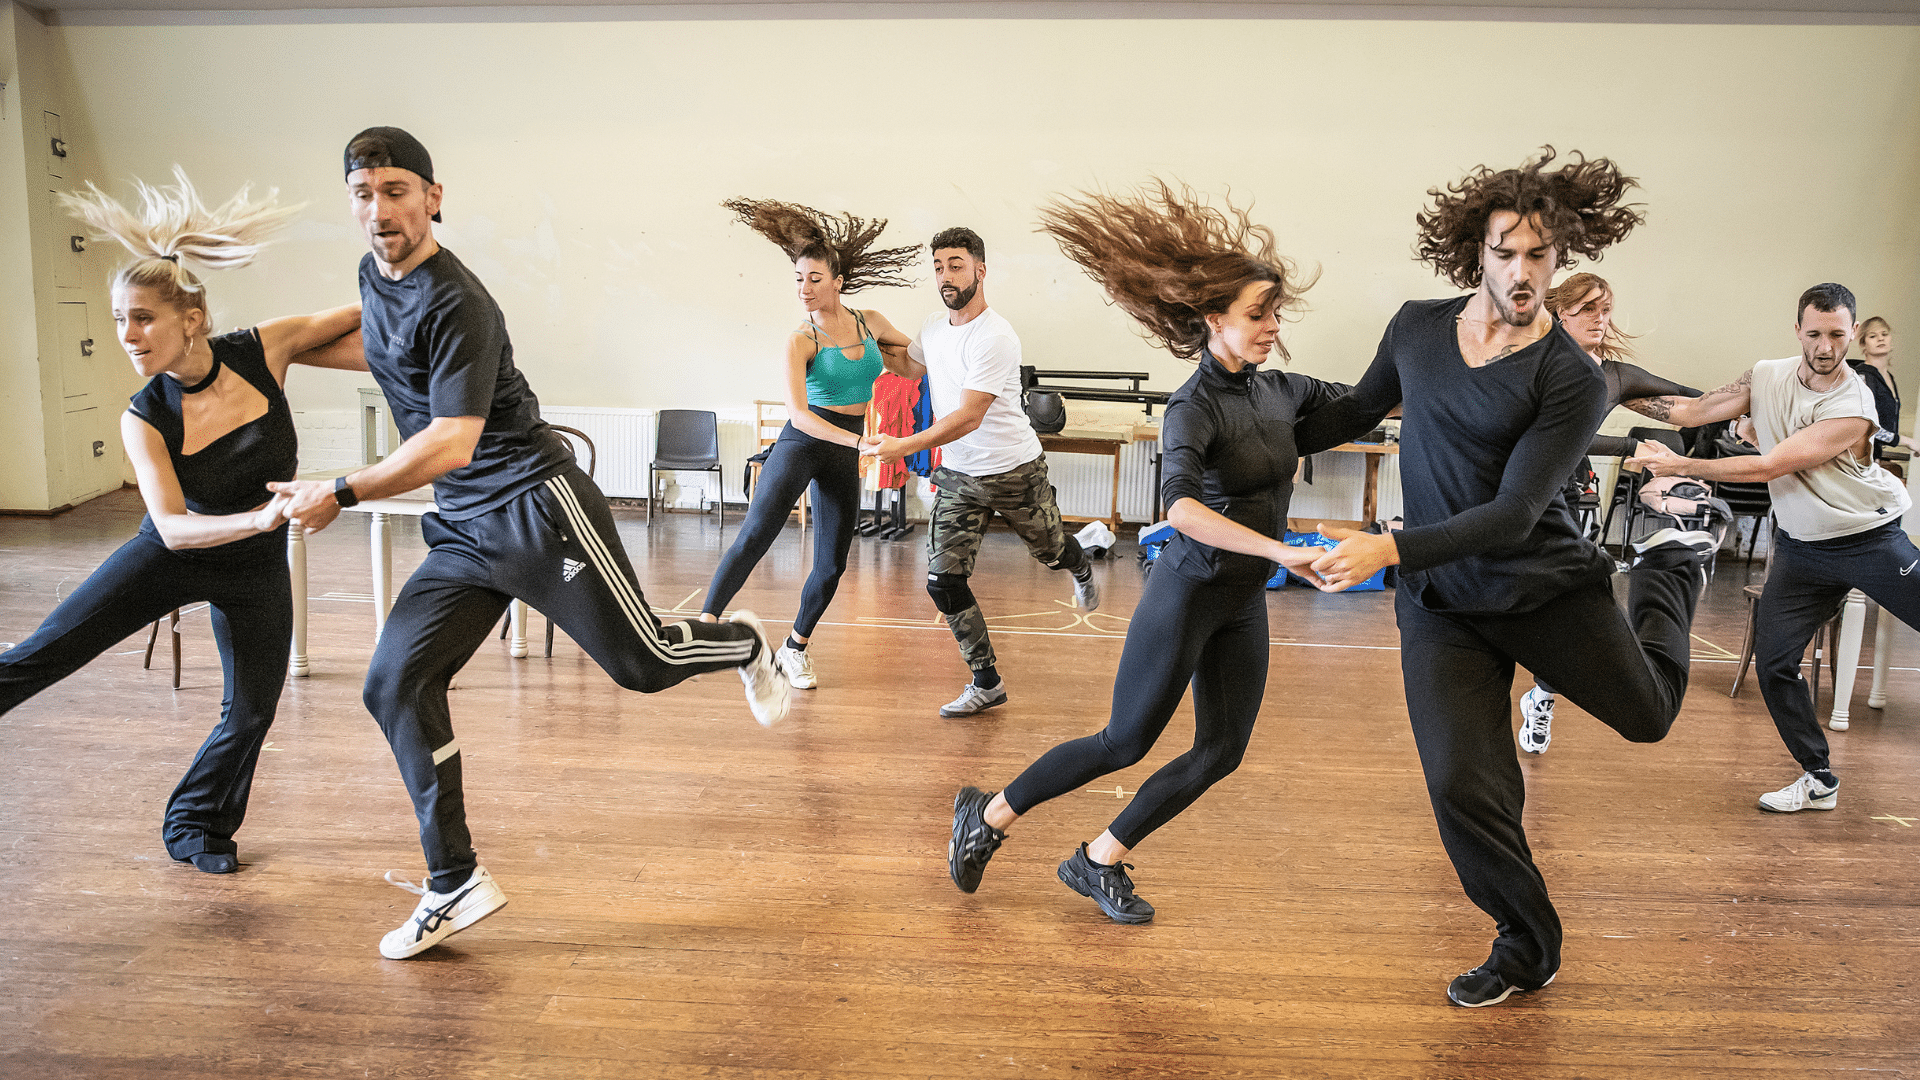 Rehearsal photo. A group of casually-dressed dancers perform in couples, clasping their hands and kicking their outside legs into the air. There is much hair swishing and concentrating faces.